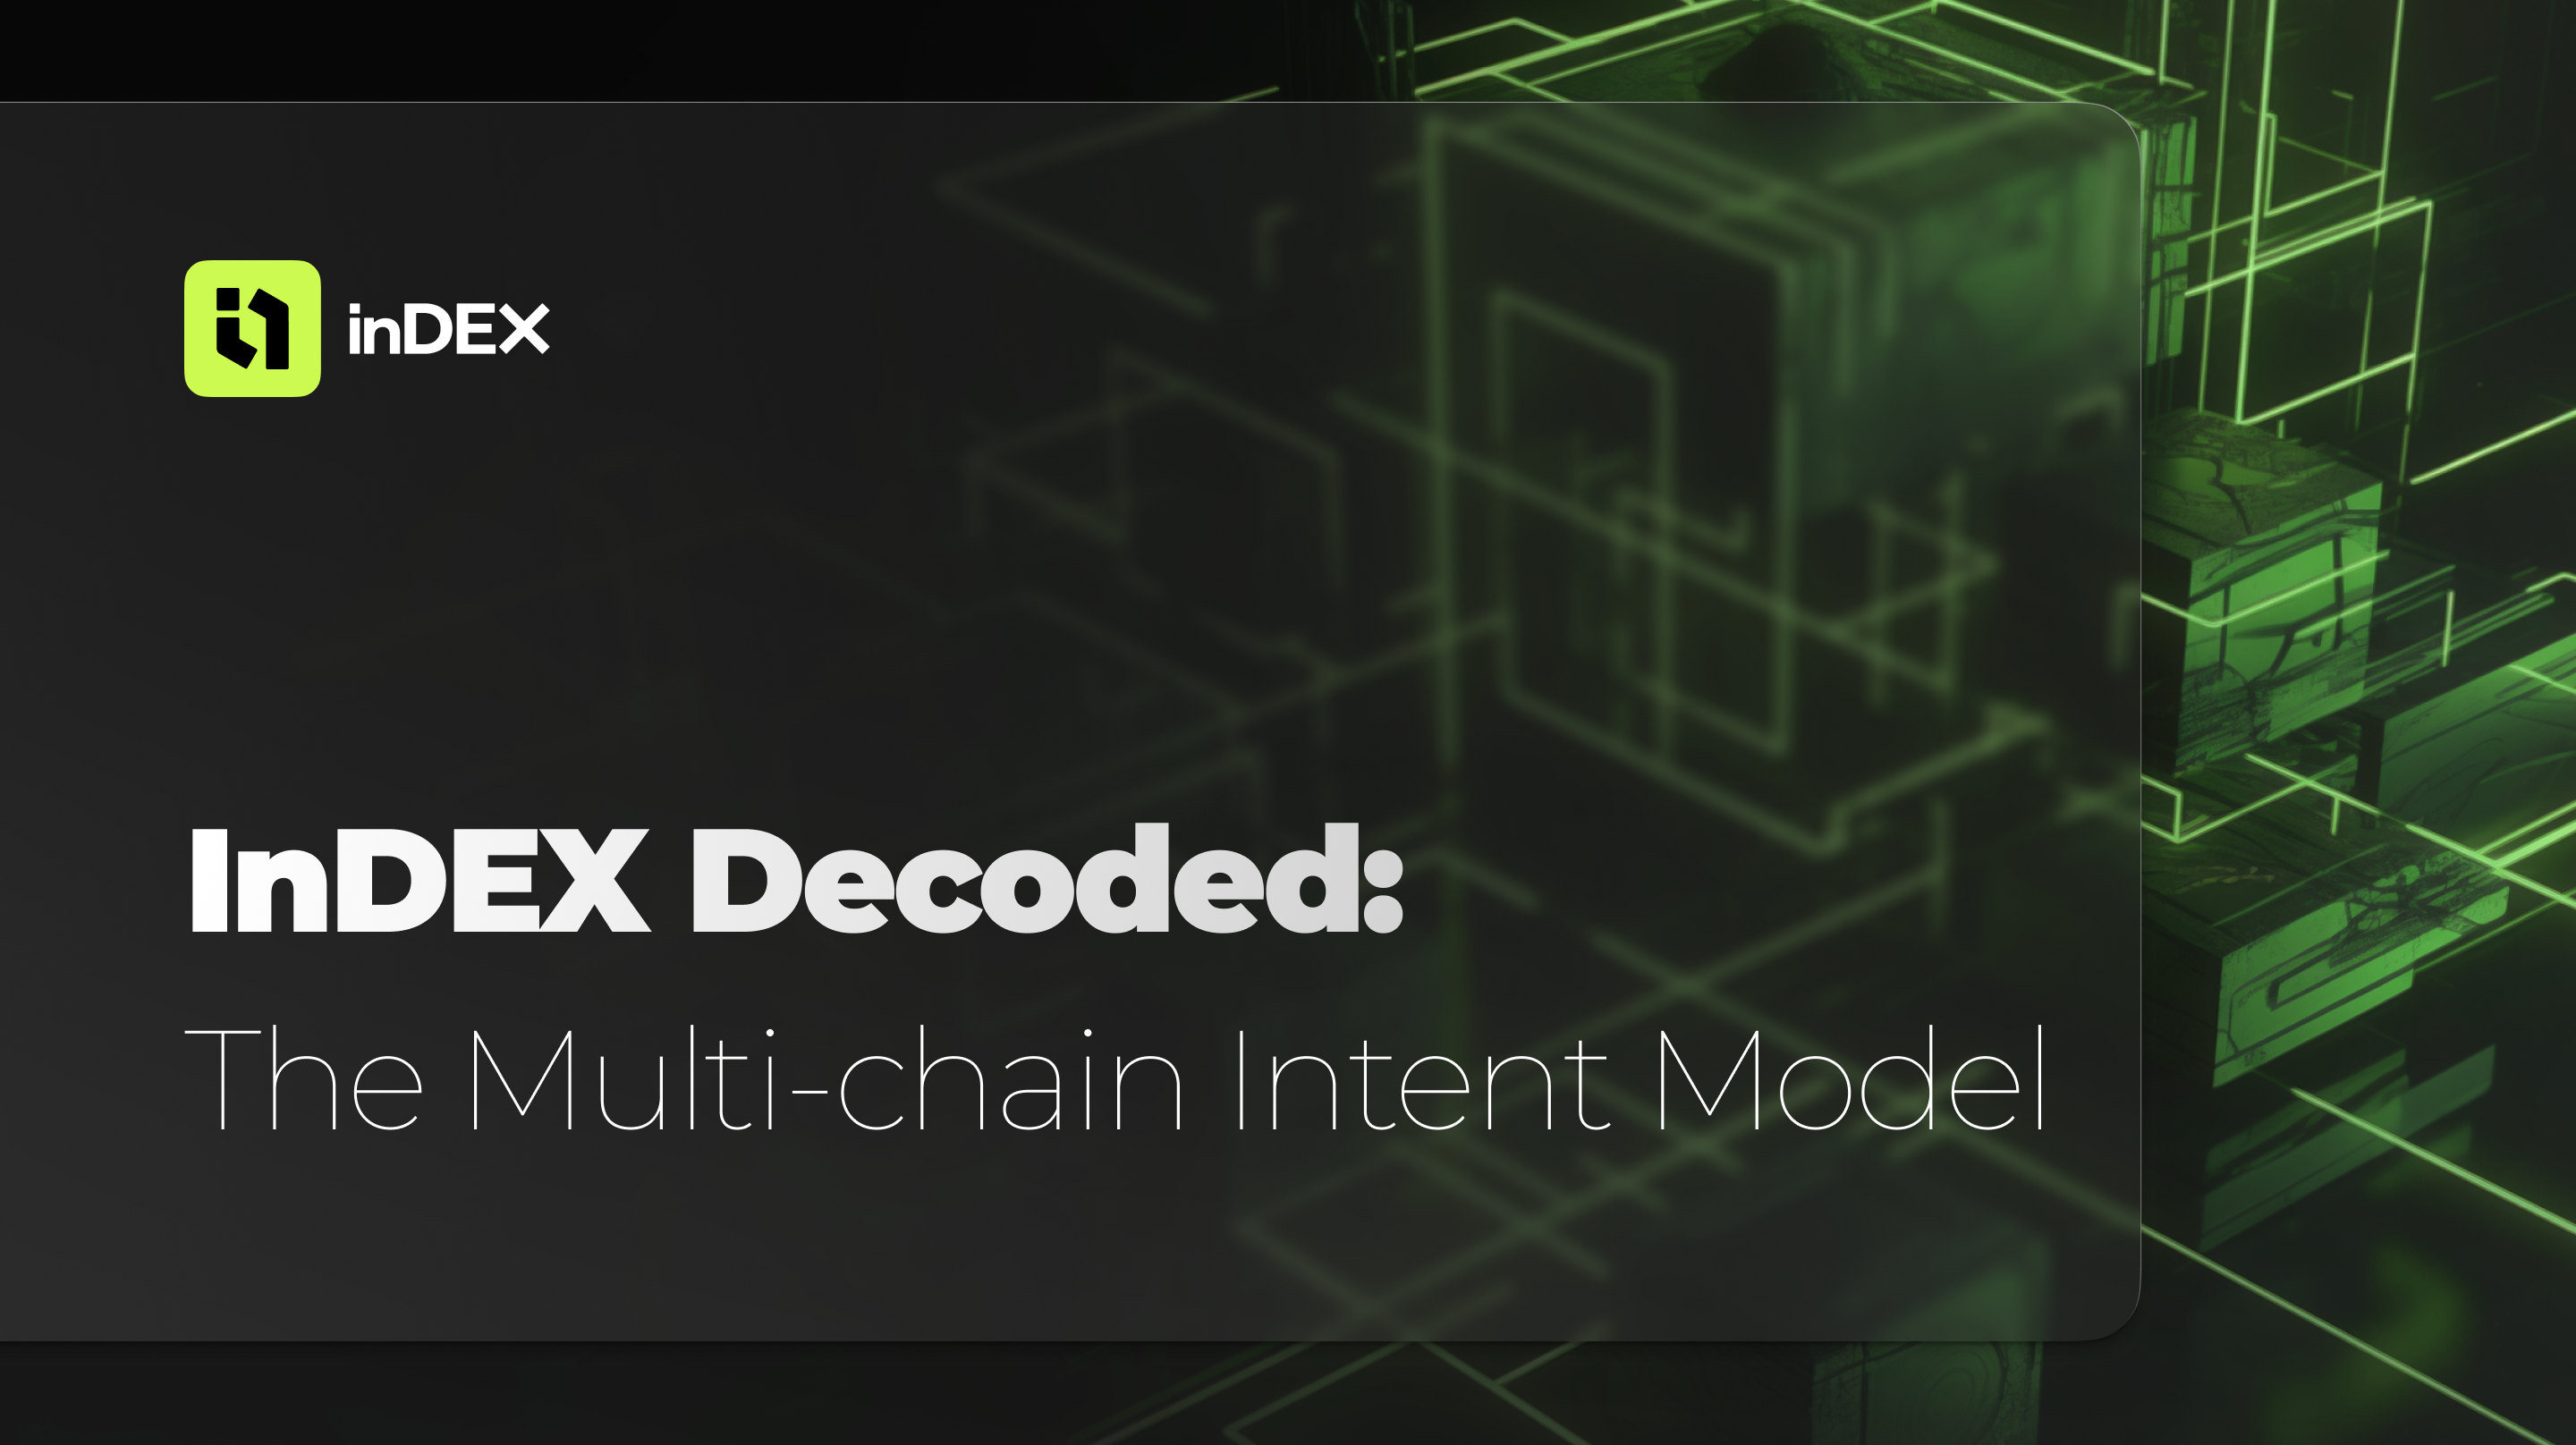 InDEX Decoded: The Multi-chain Intent Model